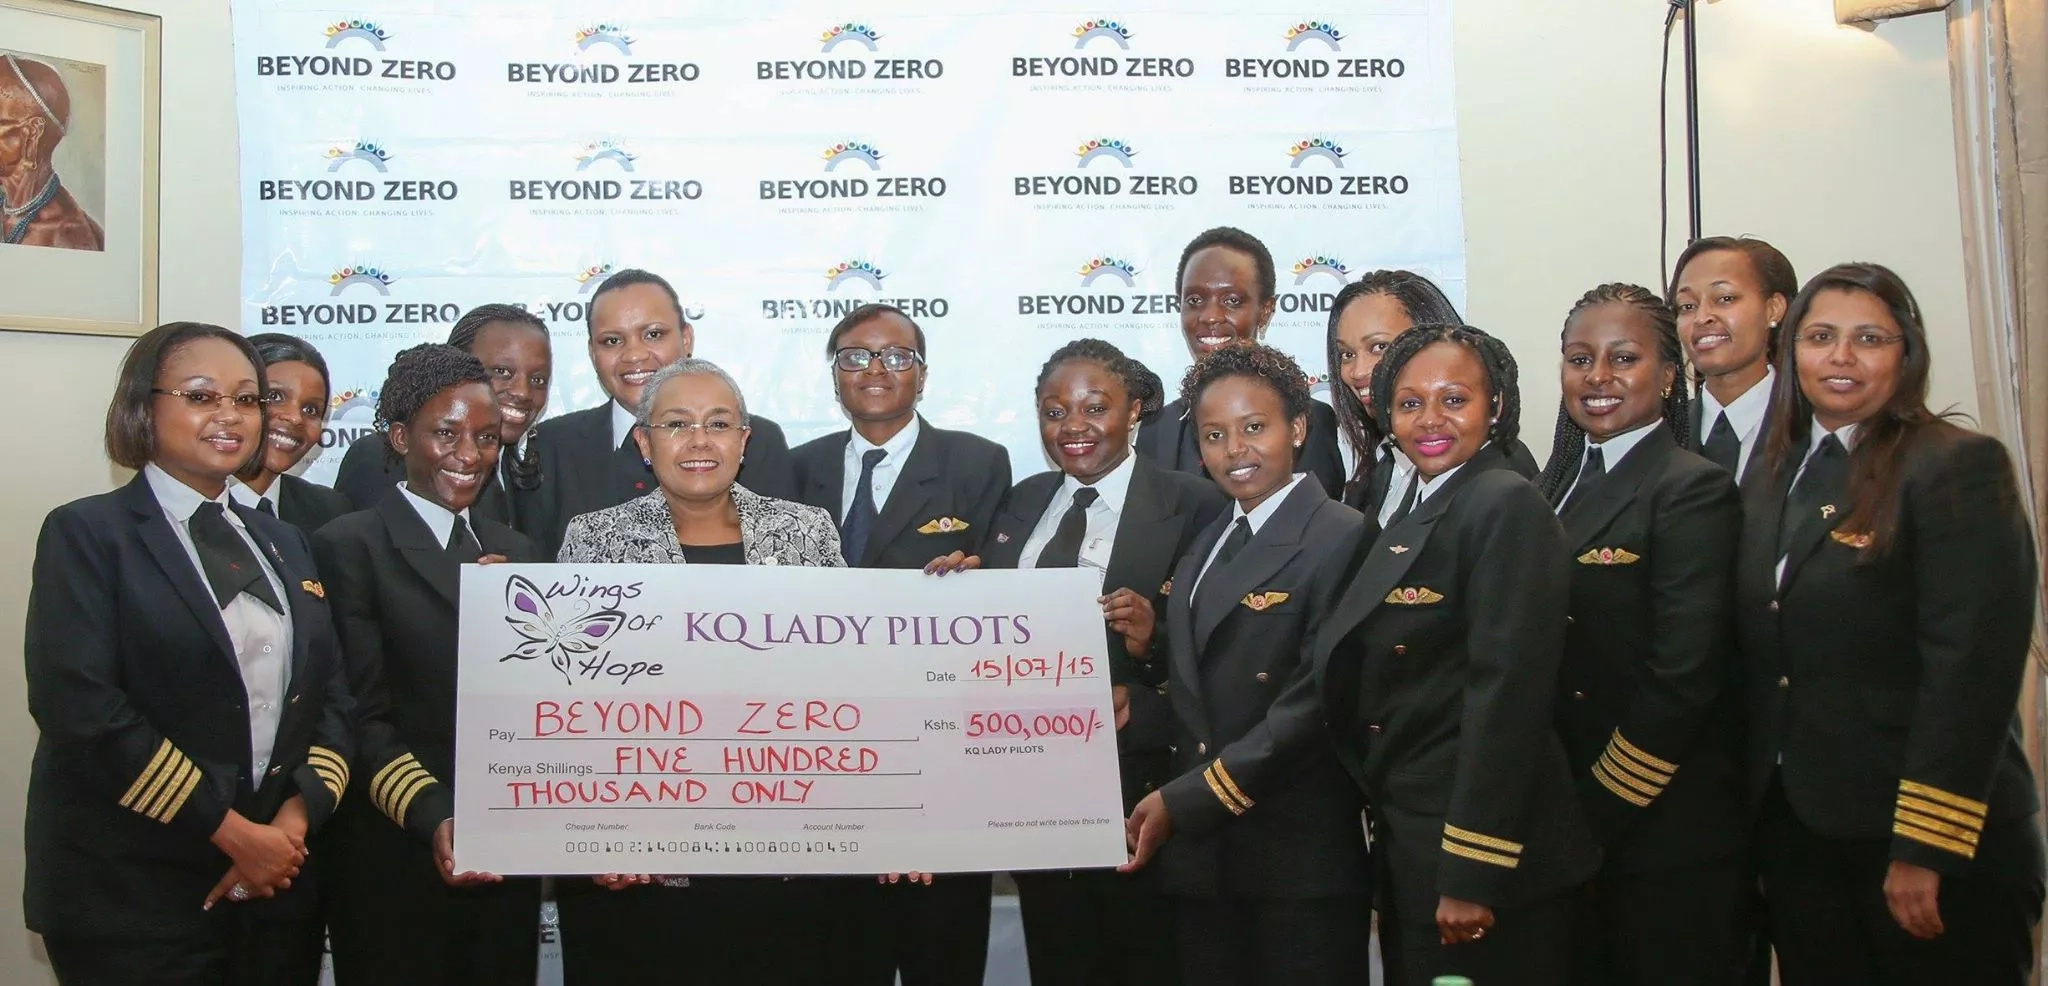 IN PHOTOS: KQ Female Pilots Pledge Support For Maternal Health Concern In The Country